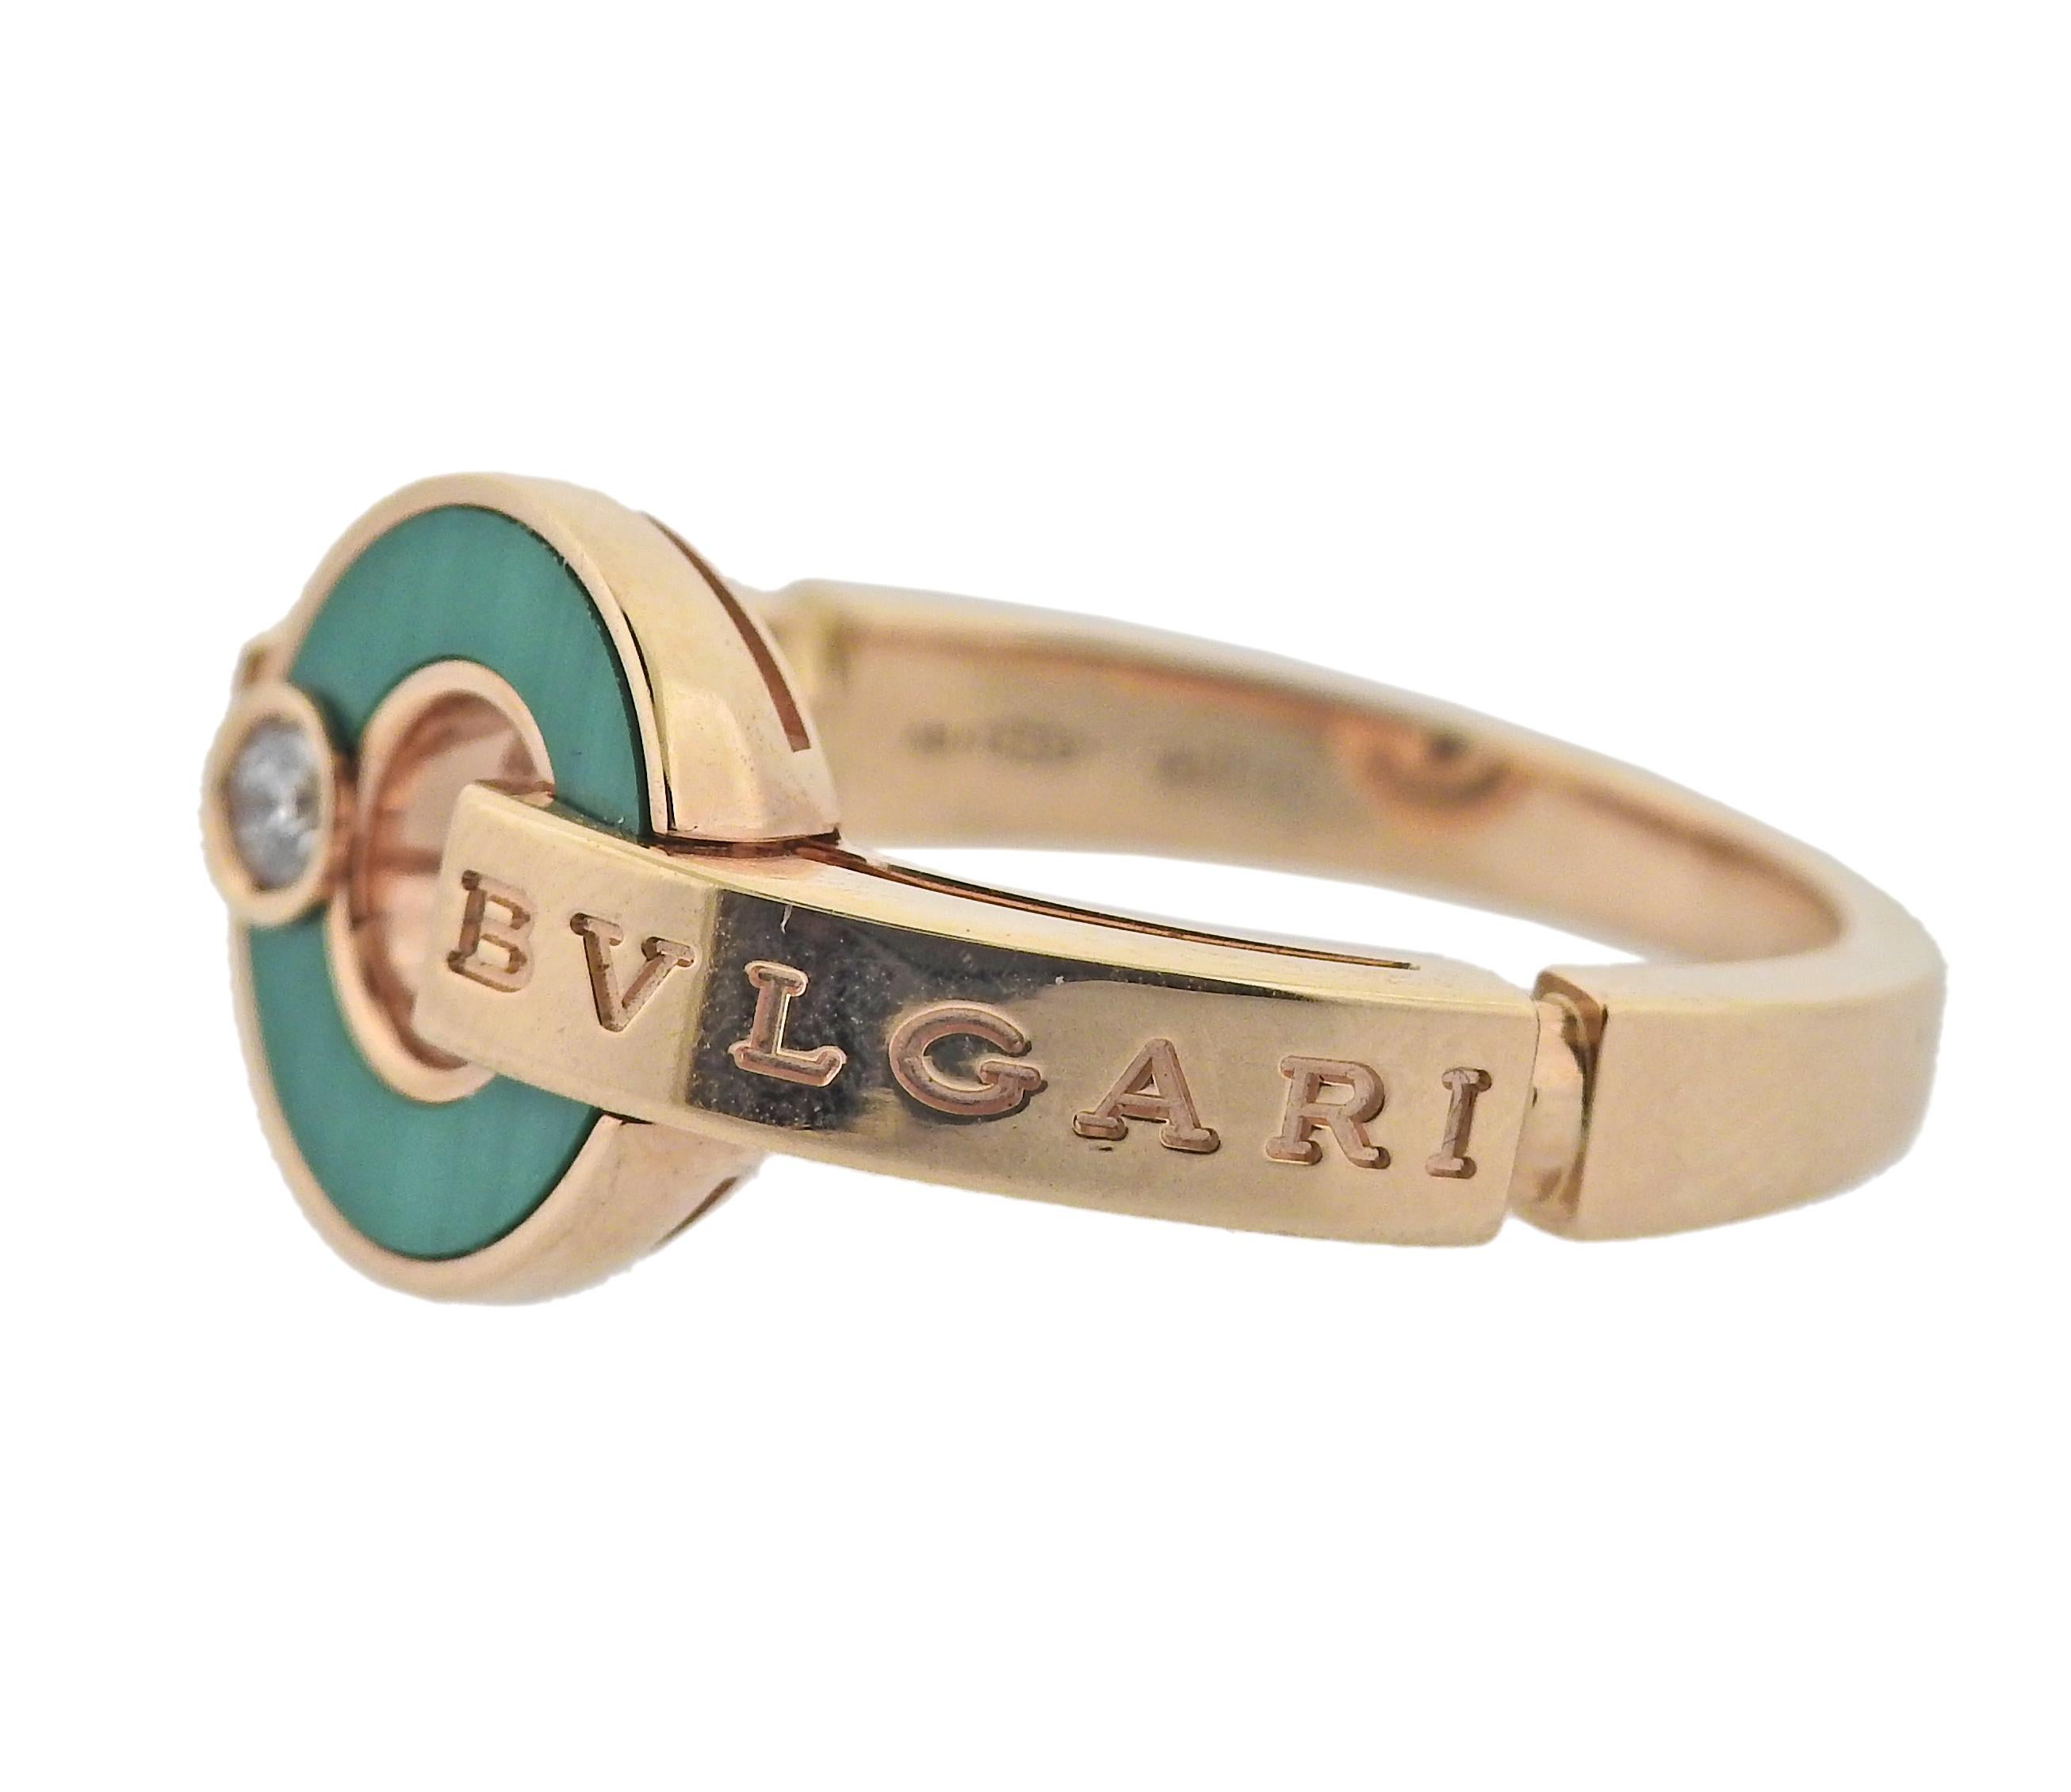 18k rose gold Bvlgari malachite and 0.08ctw G/VS diamonds ring. Retail $2640. Comes with COA and box. Ring size 6.25, top is 11mm in diameter. Mared Bvlgari, made in Italy, Italian mark, 750, Serial number. Weight 5.7 grams